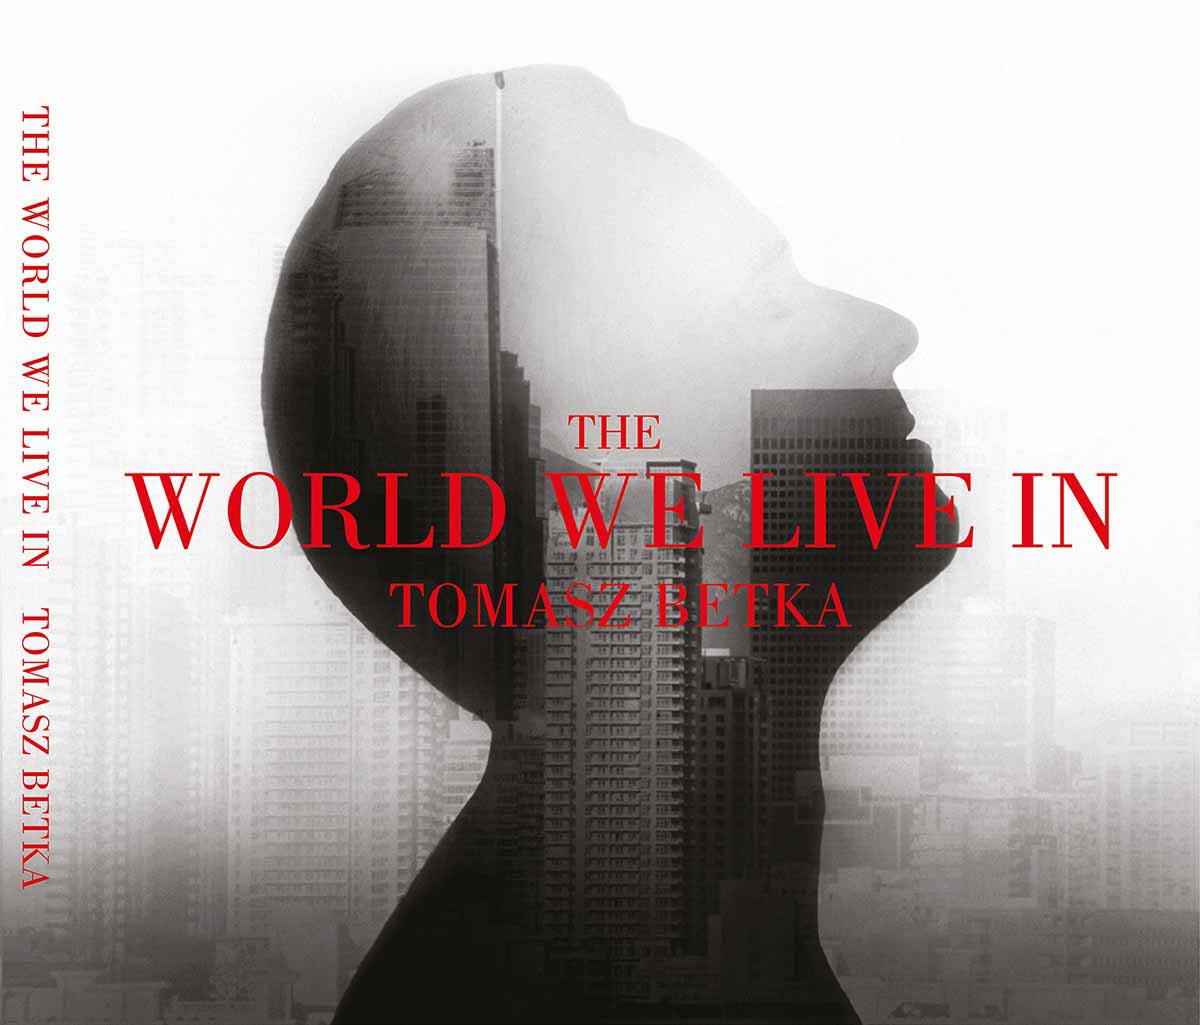 The World We Live In -Tomasz Betka